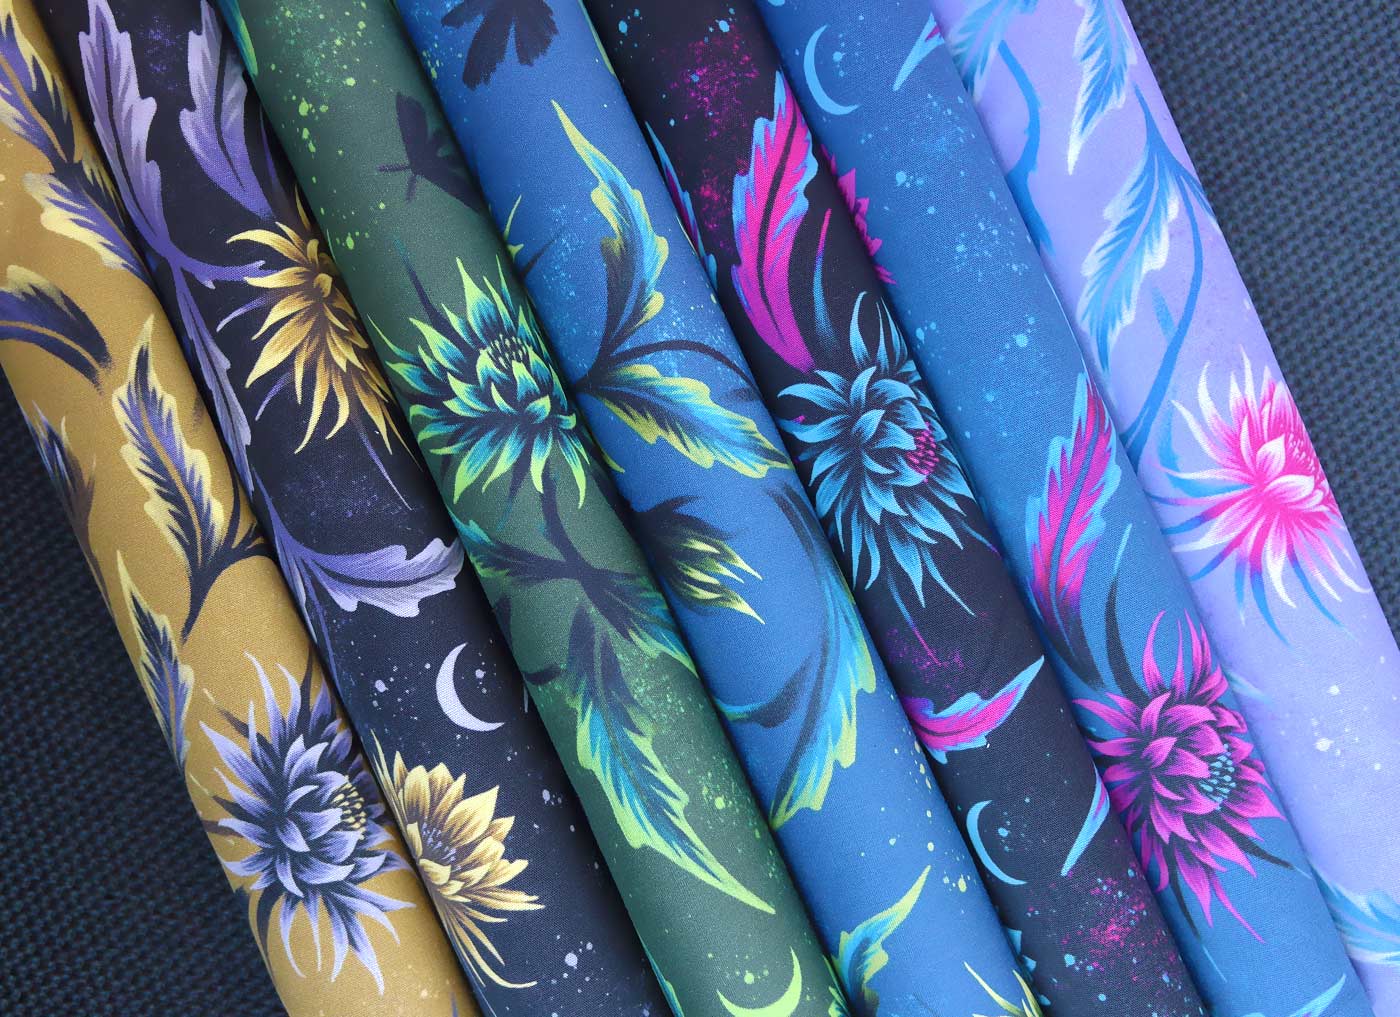 Queen of the Night fabric collection by Andrea Muller